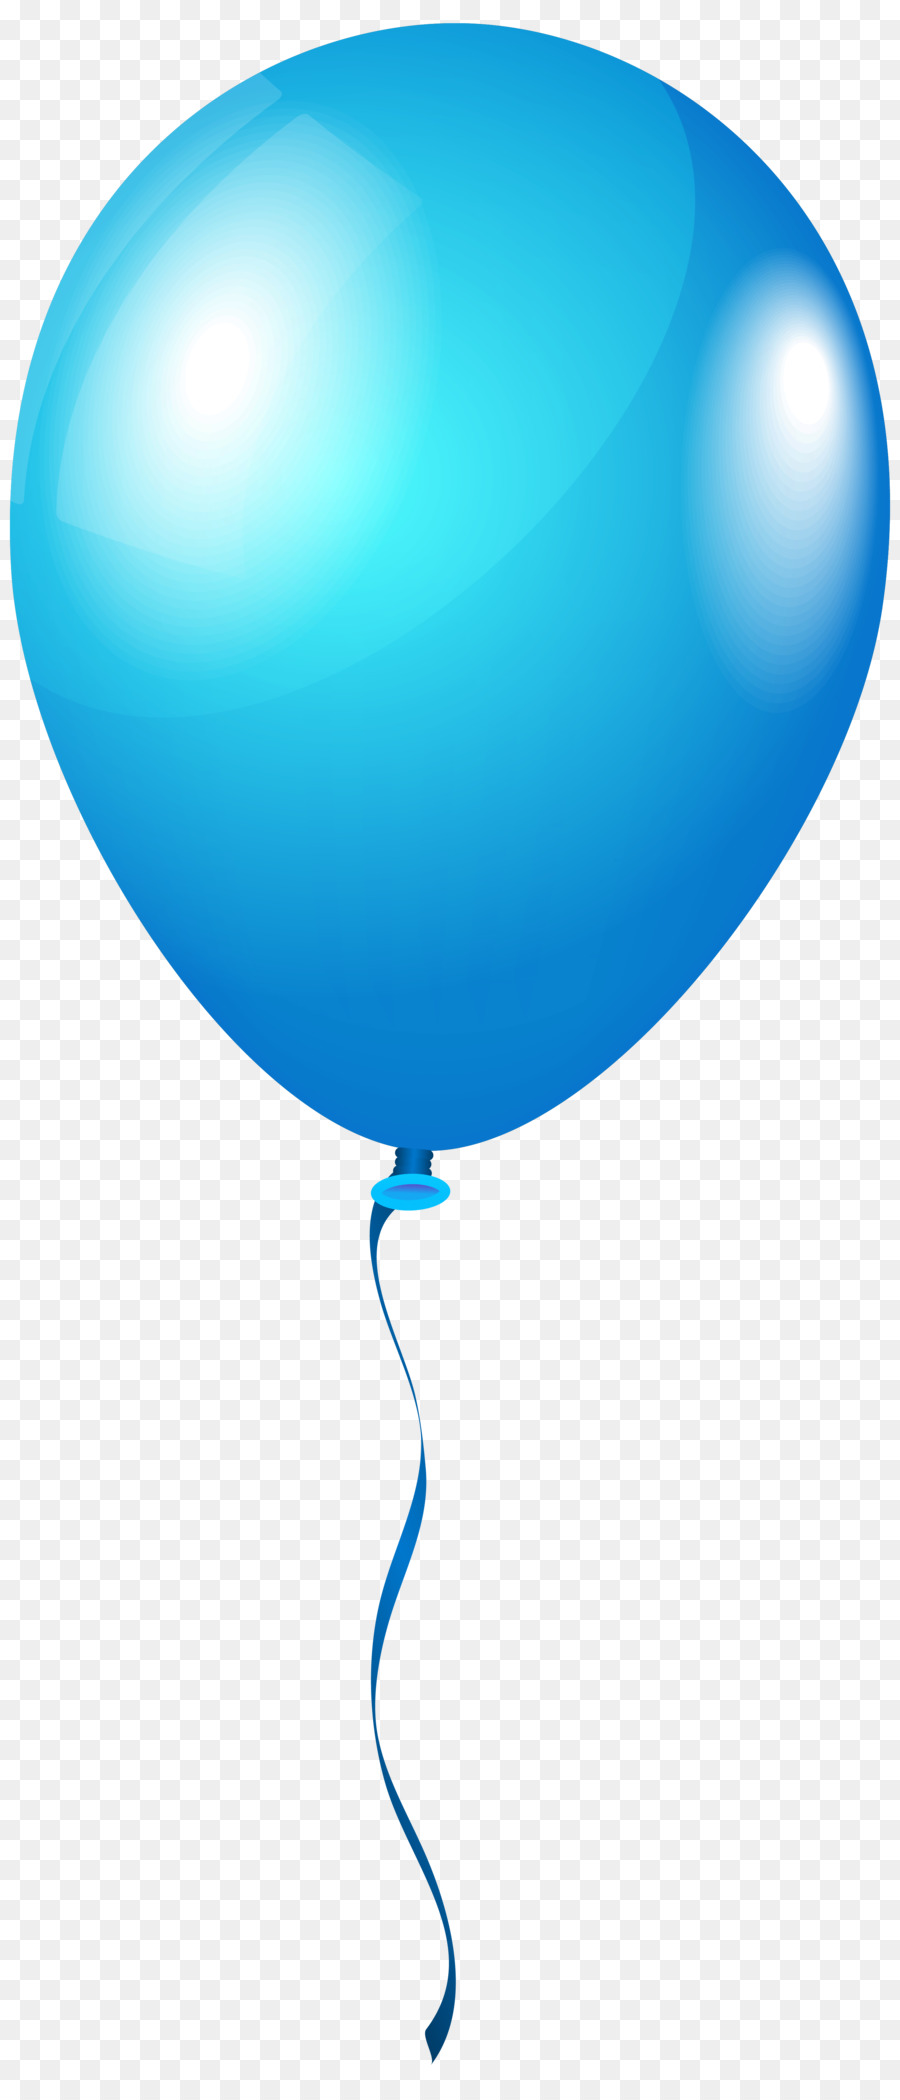 Balloon Blue Clip art - Blue Balloon Cliparts png download - 2716*6301 - Free Transparent Balloon png Download.